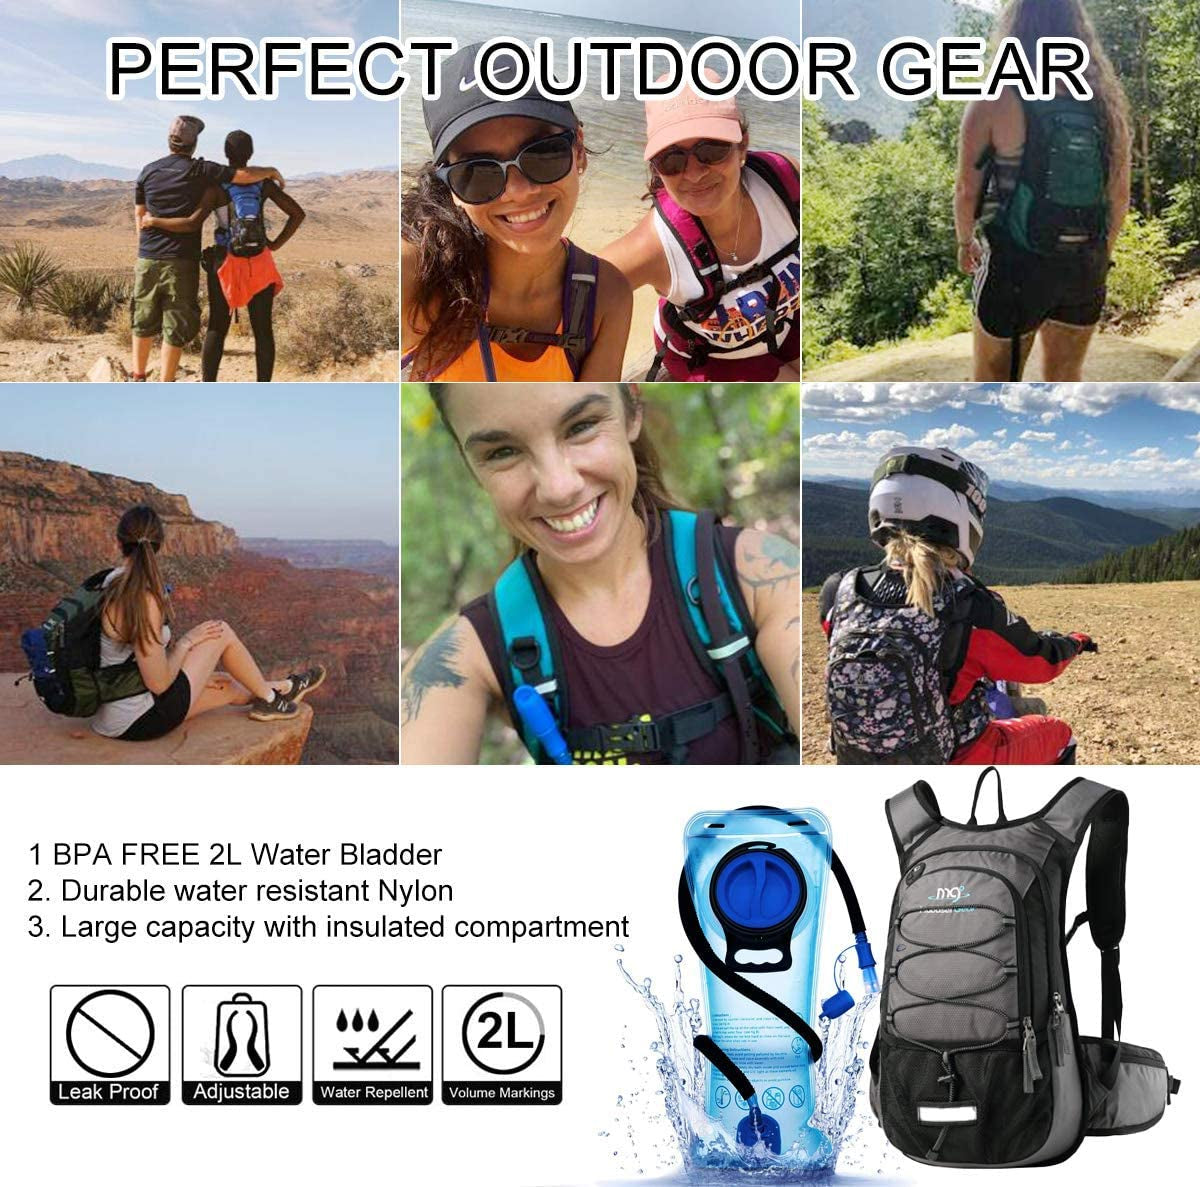 Insulated Hydration Backpack Pack with 2L BPA Free Bladder - Keeps Liquid Cool up to 5 Hours – for Running, Hiking, Cycling, Camping